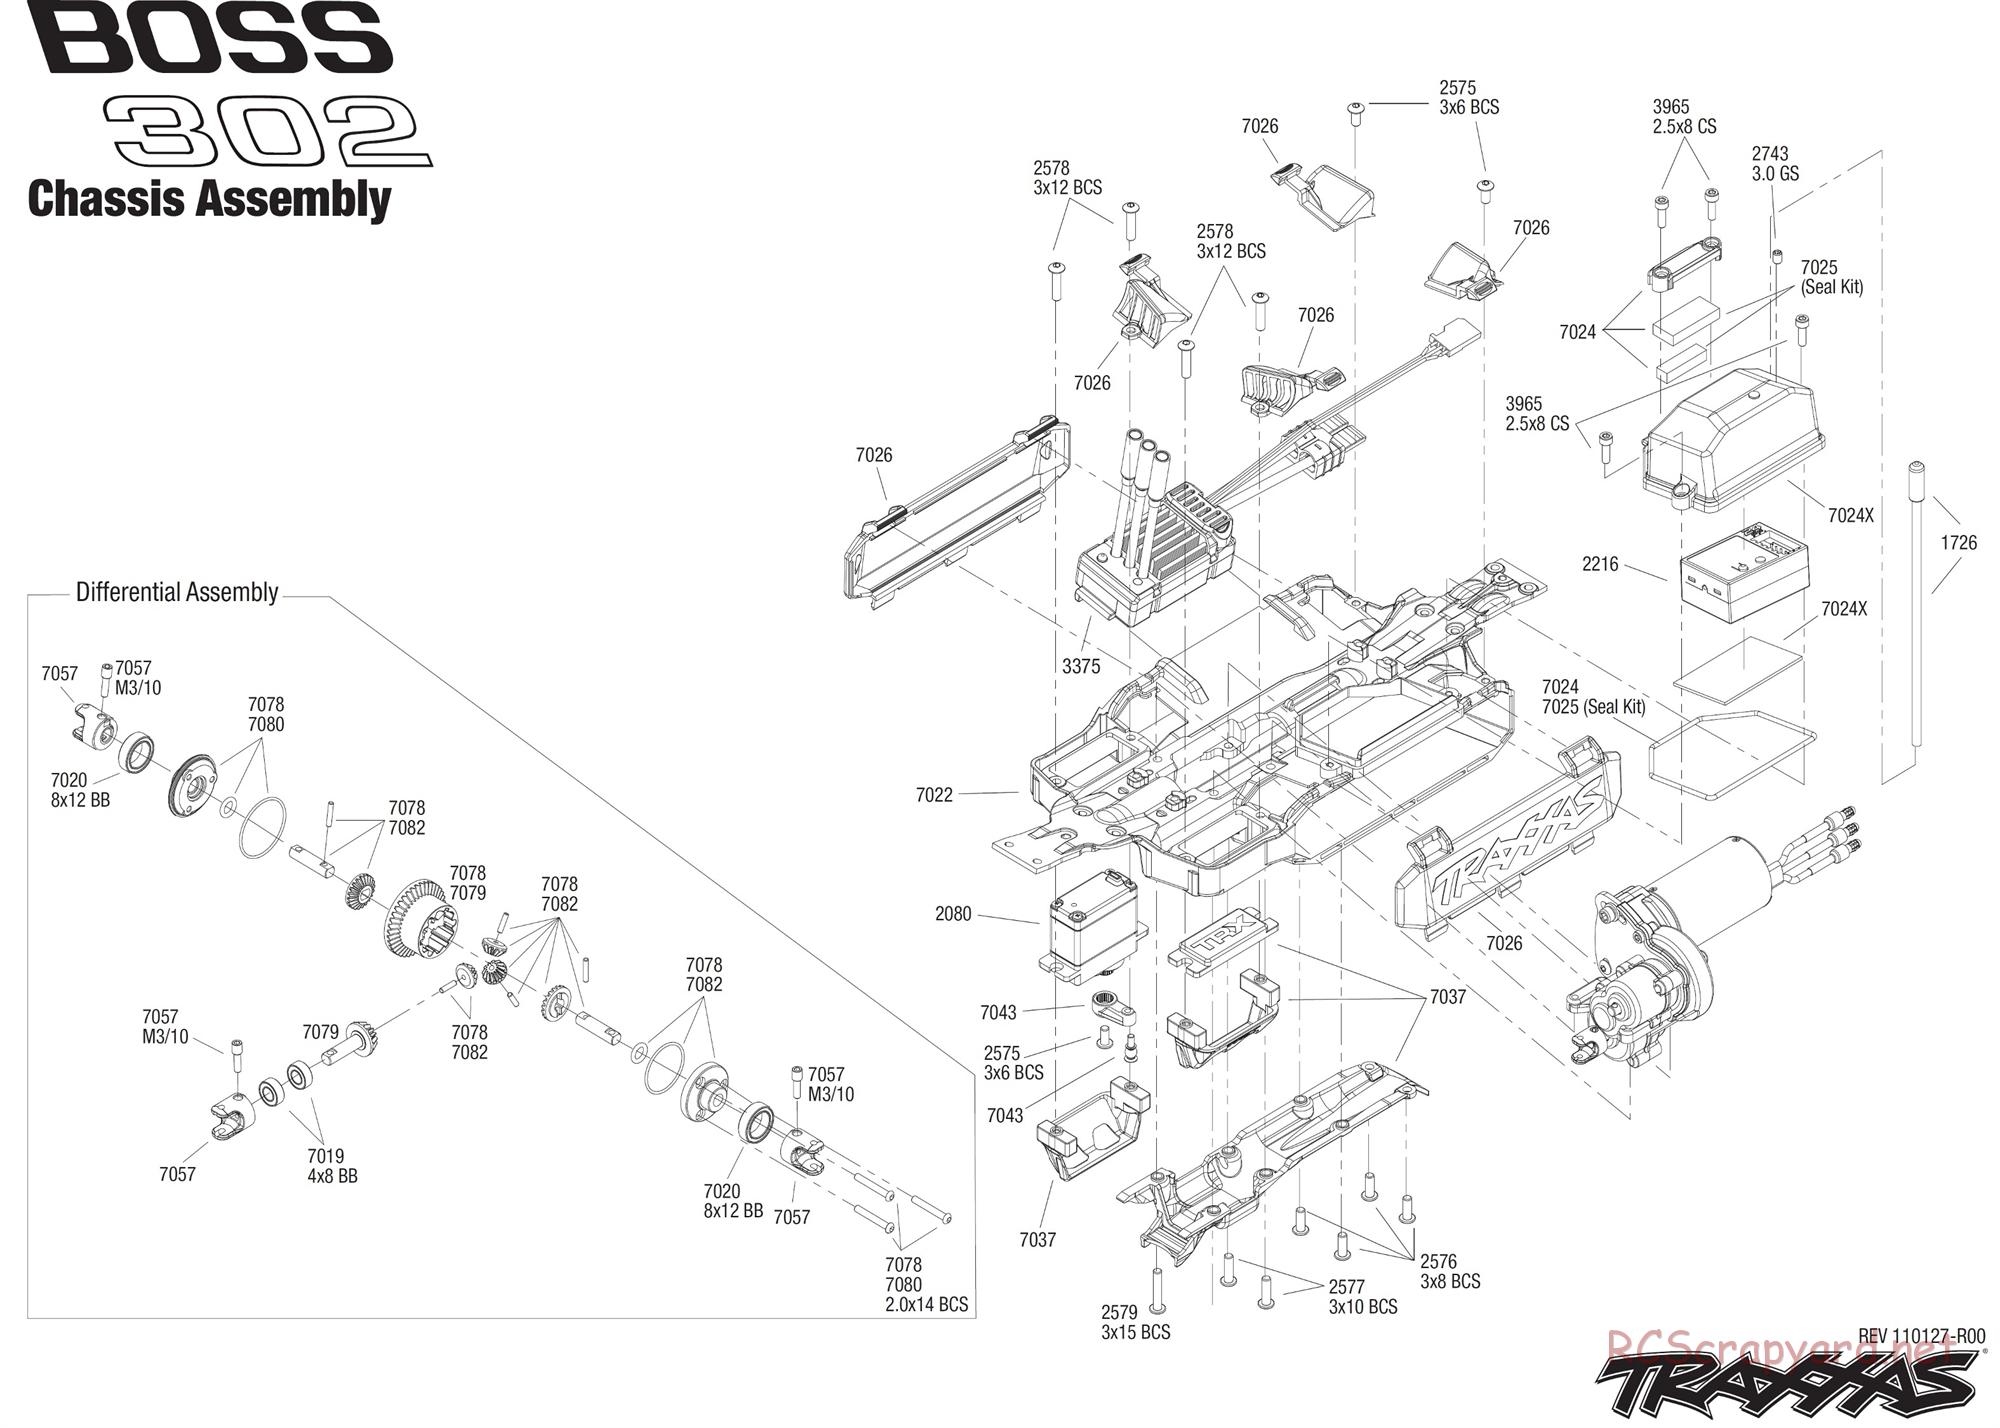 Traxxas - 1/16 Ford Mustang Boss 302 Brushless (2011) - Exploded Views - Page 1